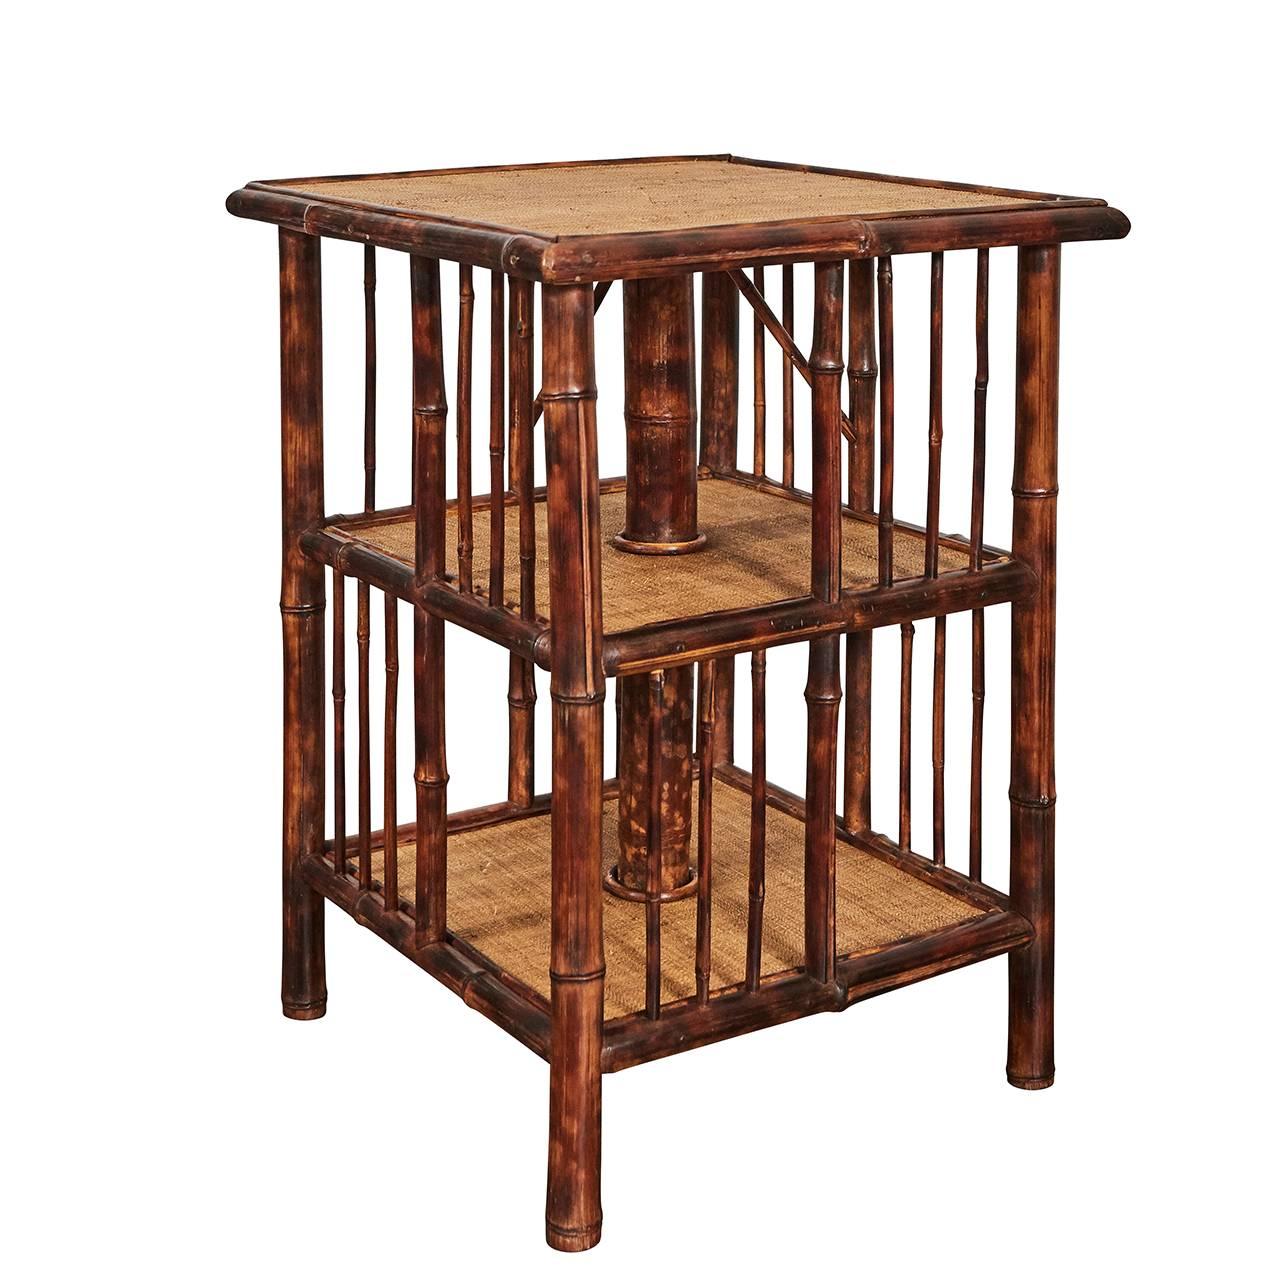 This unique piece of English Victorian Bamboo furniture was originally a rotating bookstand and now serves as side table with space below for storage. The piece has a thin bamboo cage with alternating open compartments. The surfaces have been